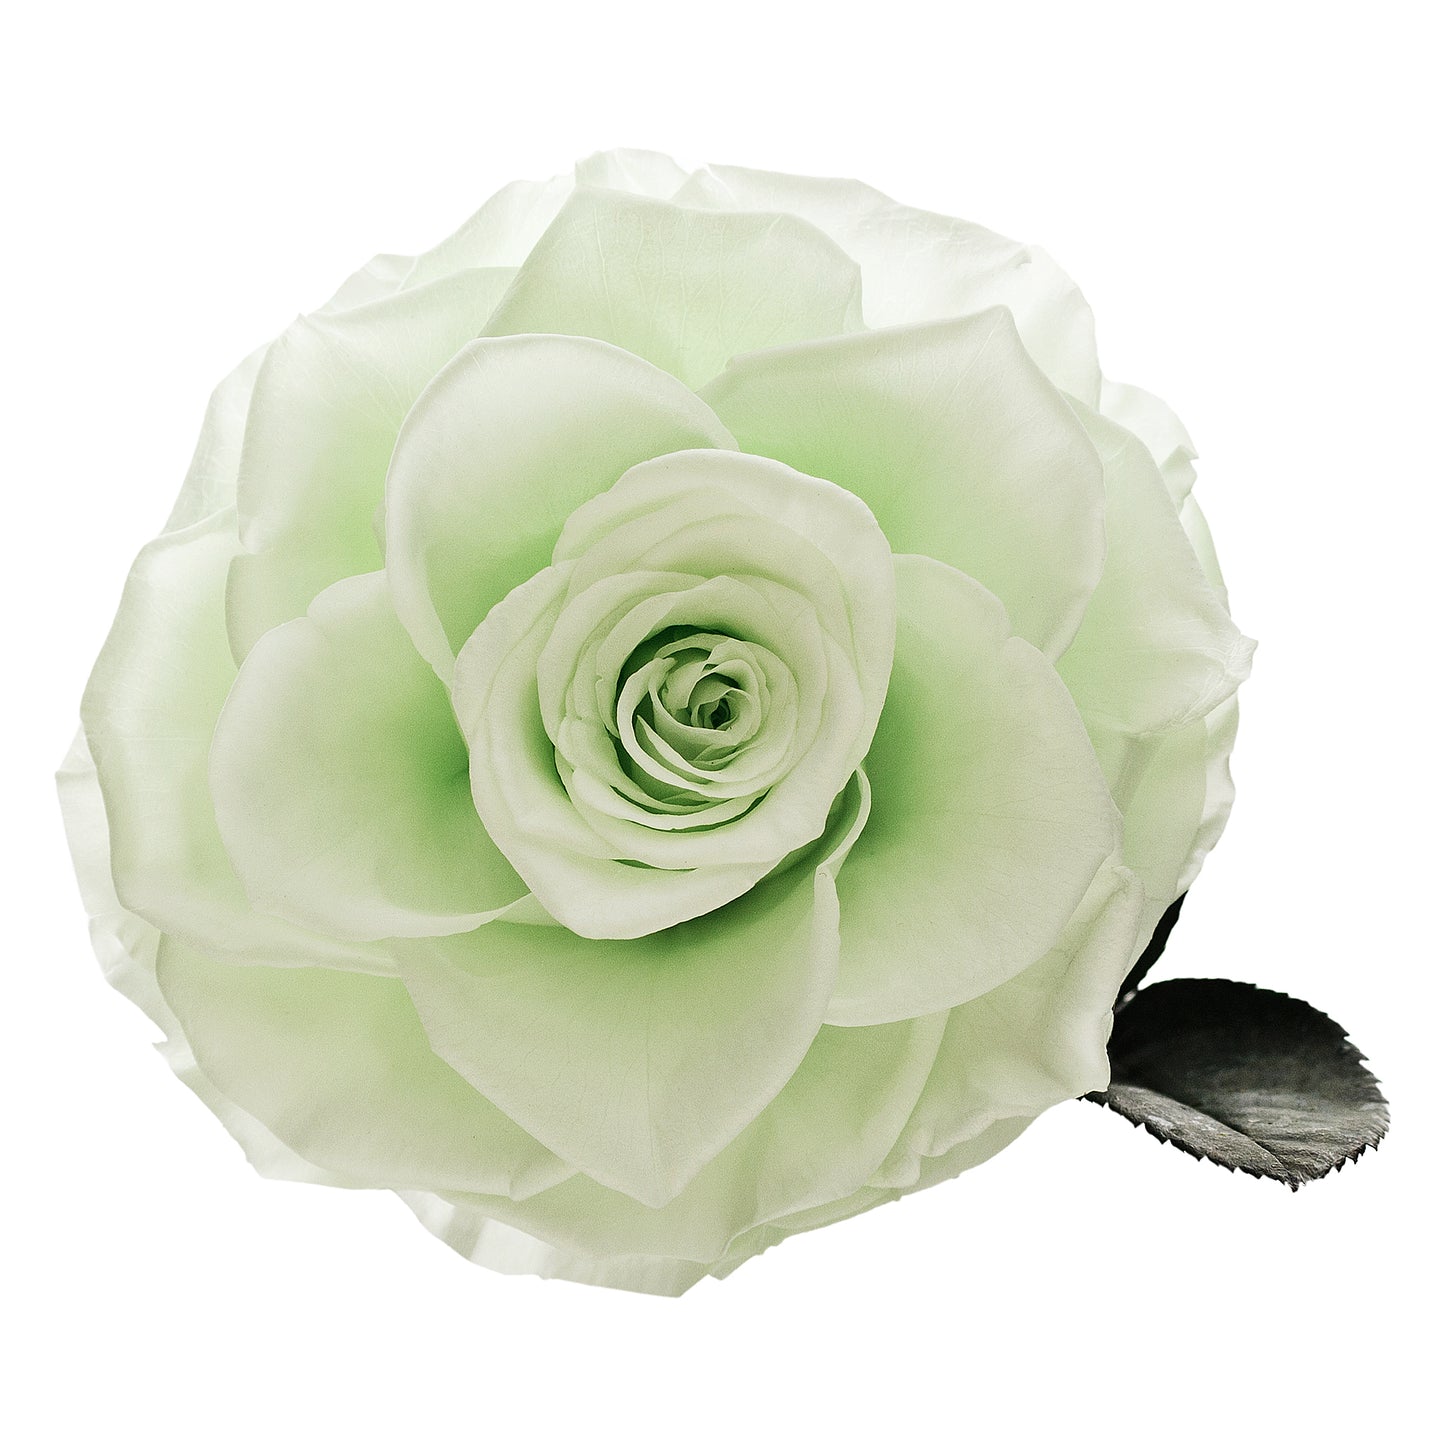 Mint Infinity Rose in Glass Dome